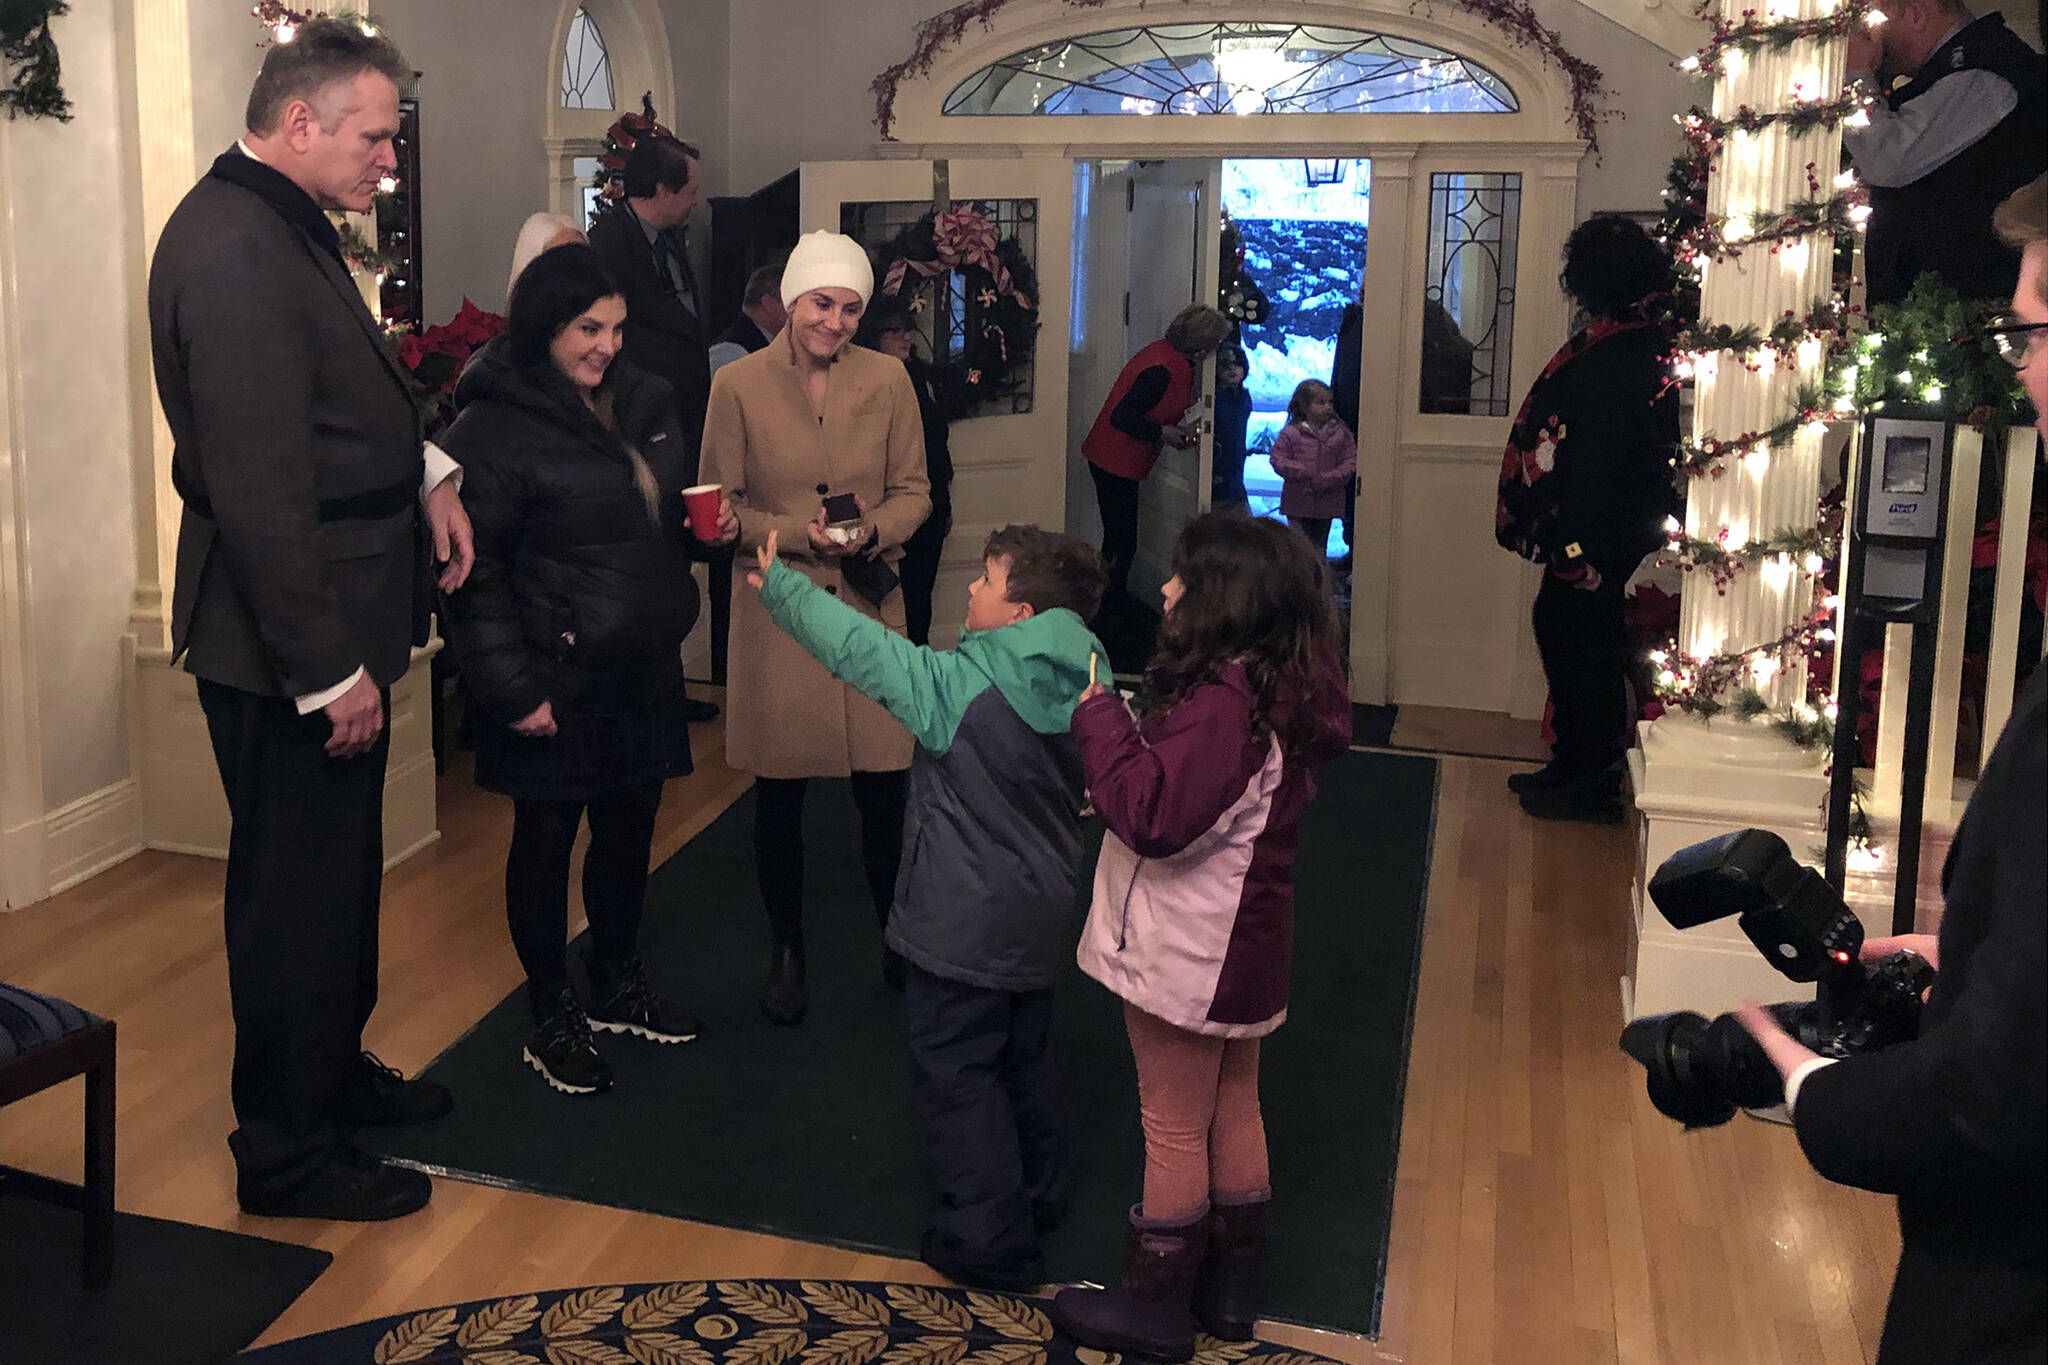 Children wave goodbye to Gov. Mike Dunleavy at a Christmas open house event at the Alaska Governor’s Mansion on Tuesday, Dec. 7, 2021. The event was suspended in 2020 due to COVID-19 but returned this year with slight health mitigation alterations. The event was well-attended by Juneau families. (Peter Segall / Juneau Empire)